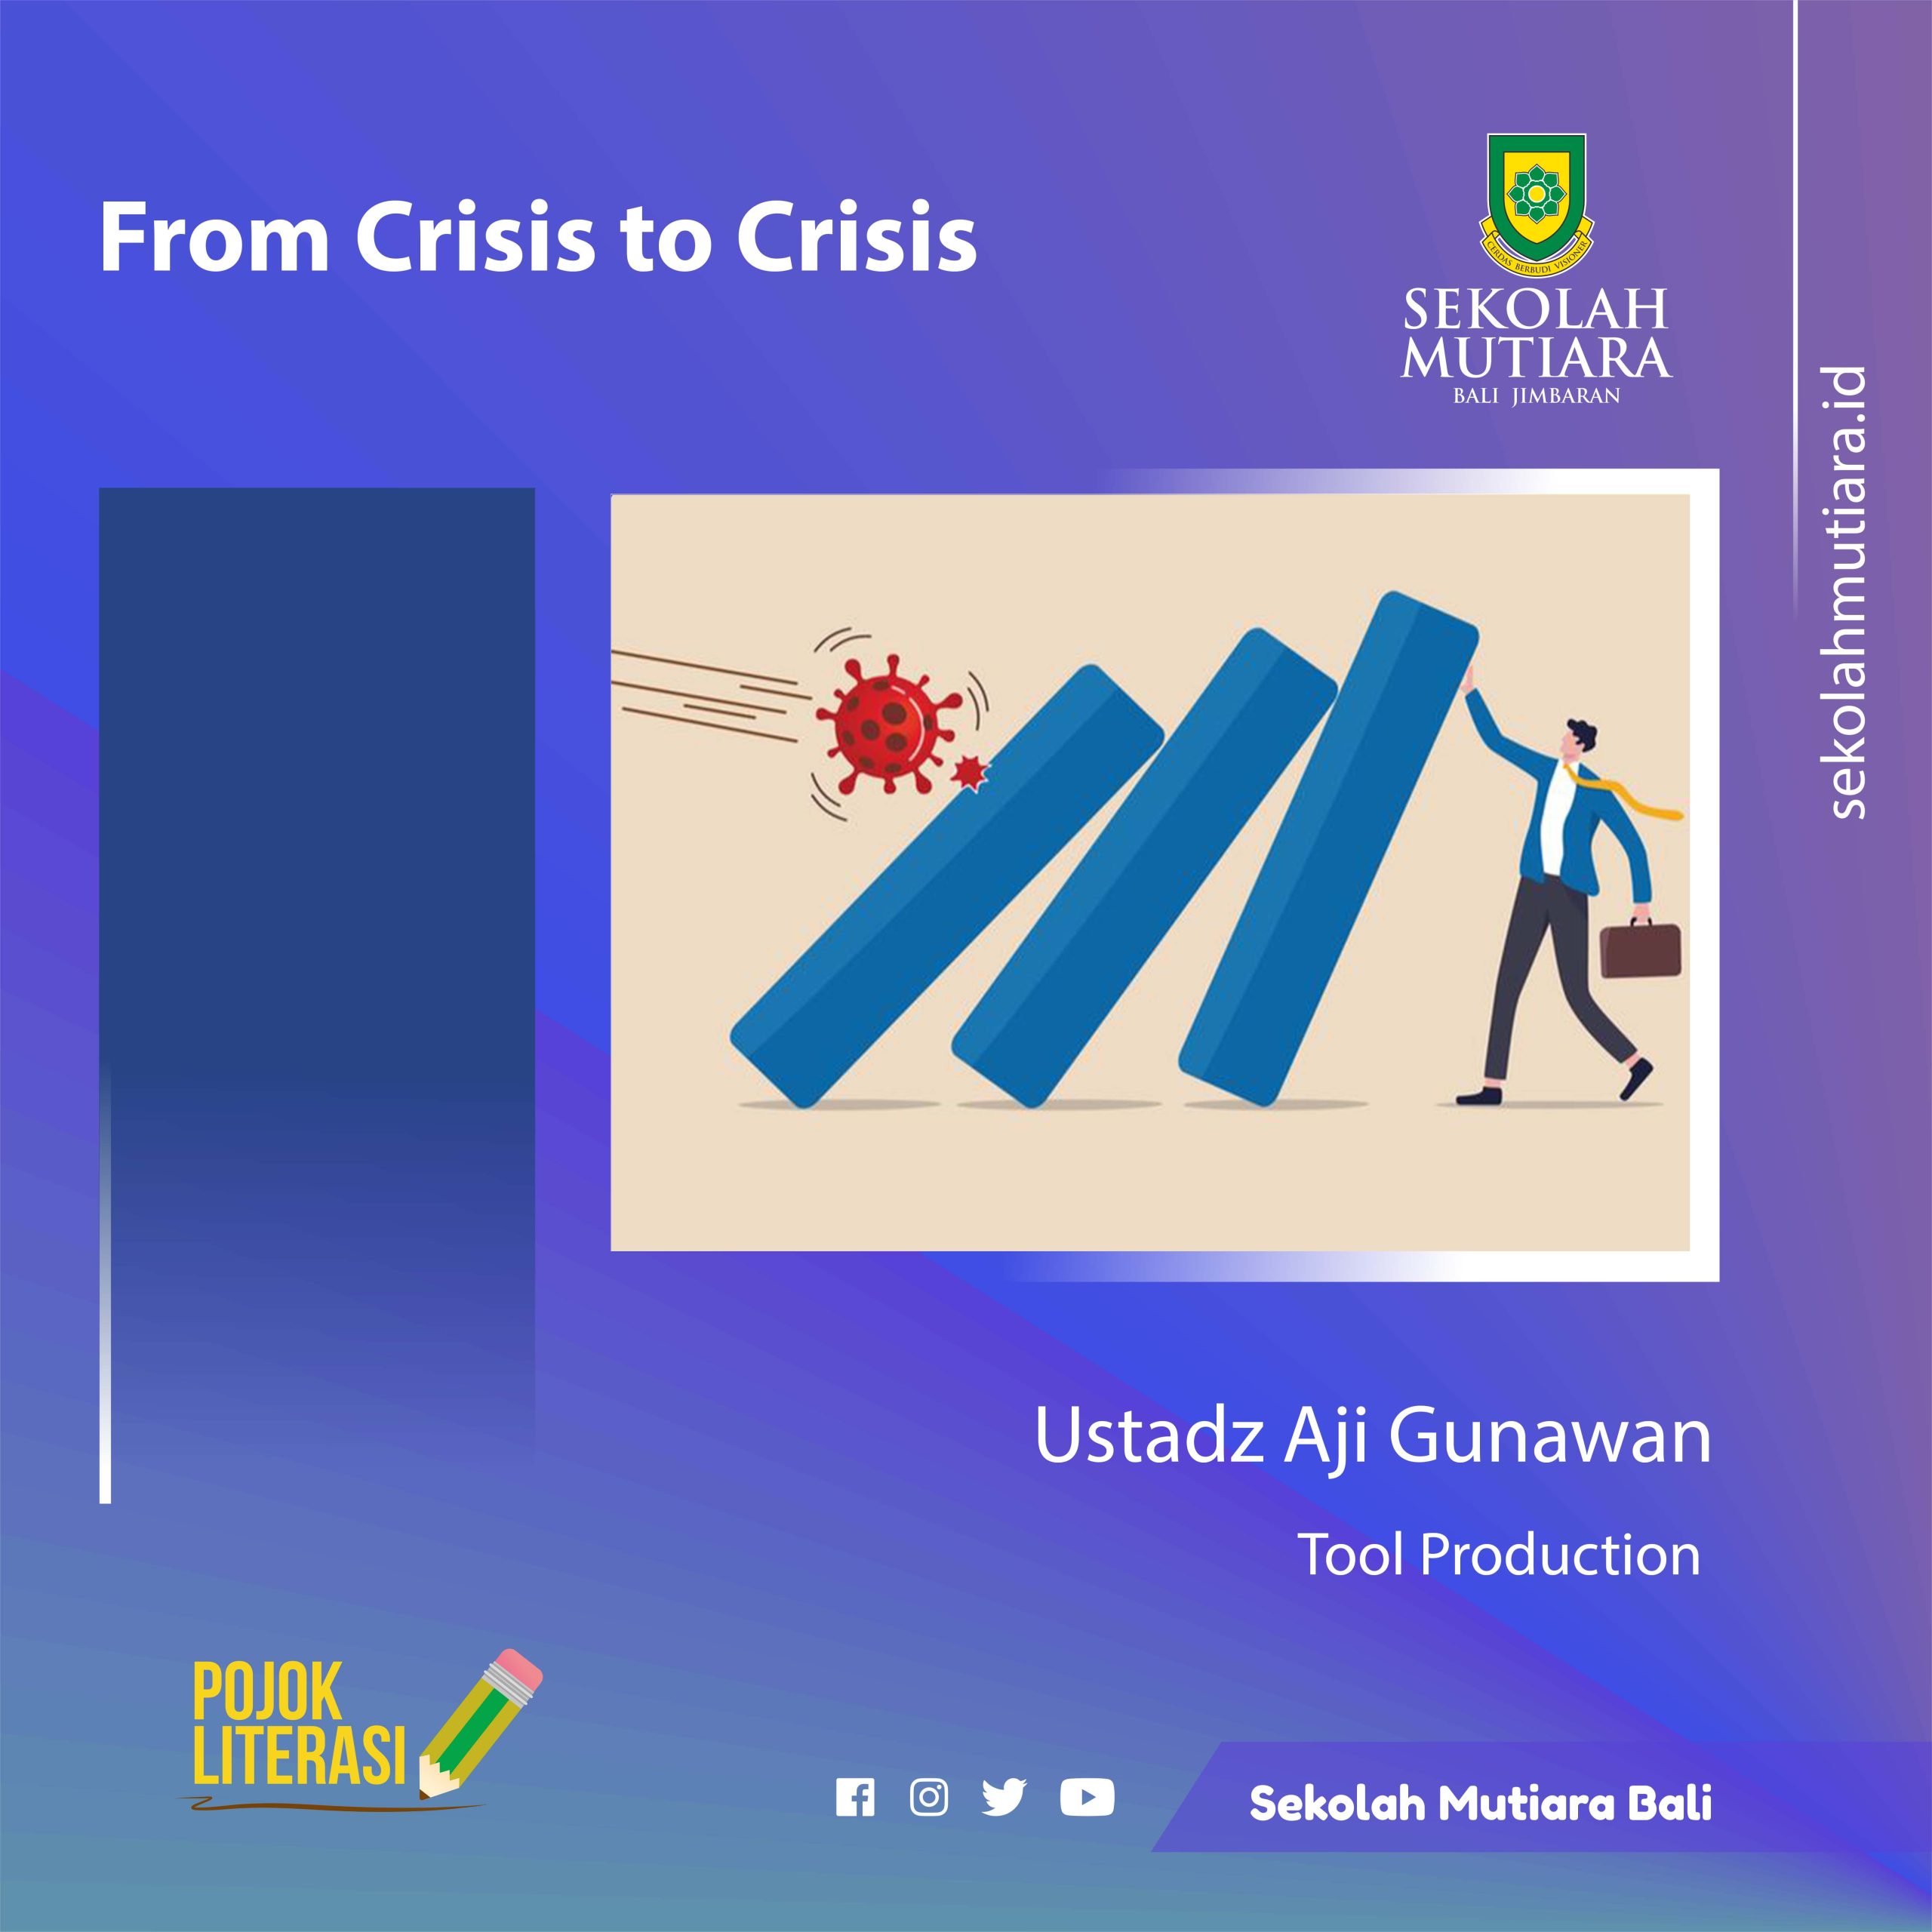 From Crisis to Crisis